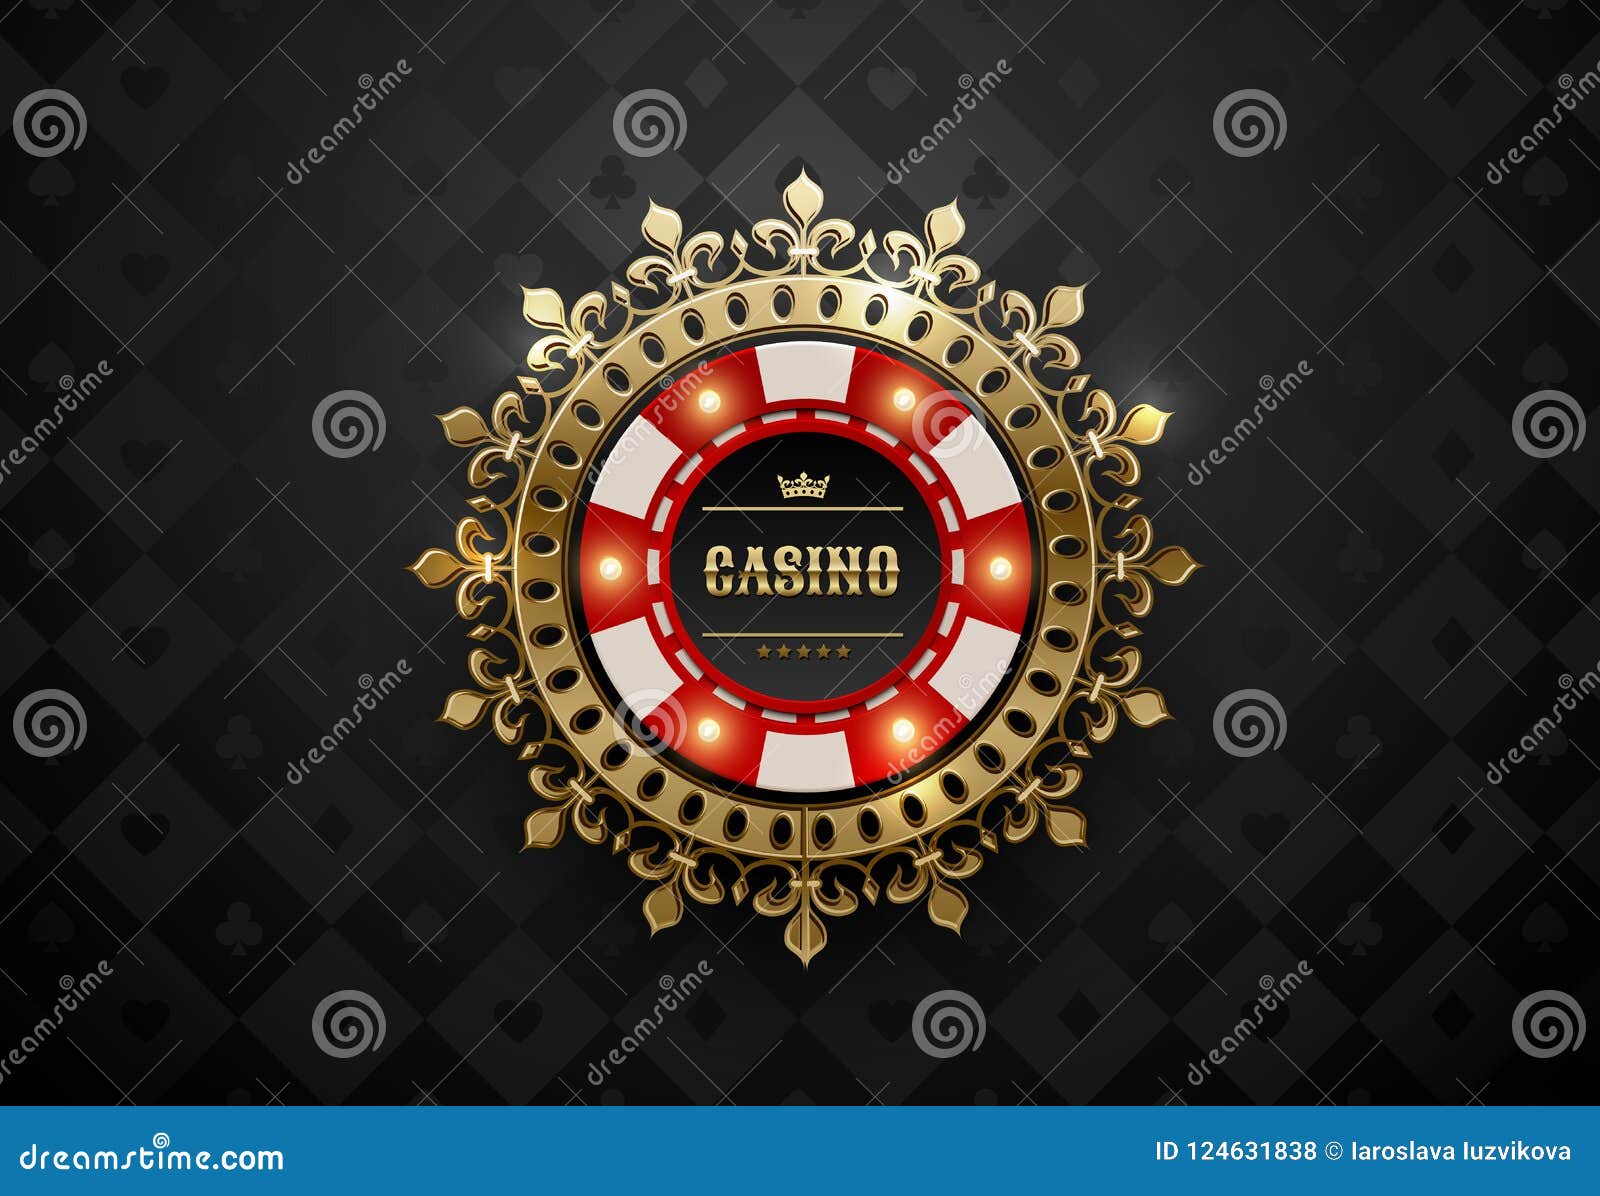  red white casino poker chip with luminous light s and golden crown wreath frame. black silk geometric card suits